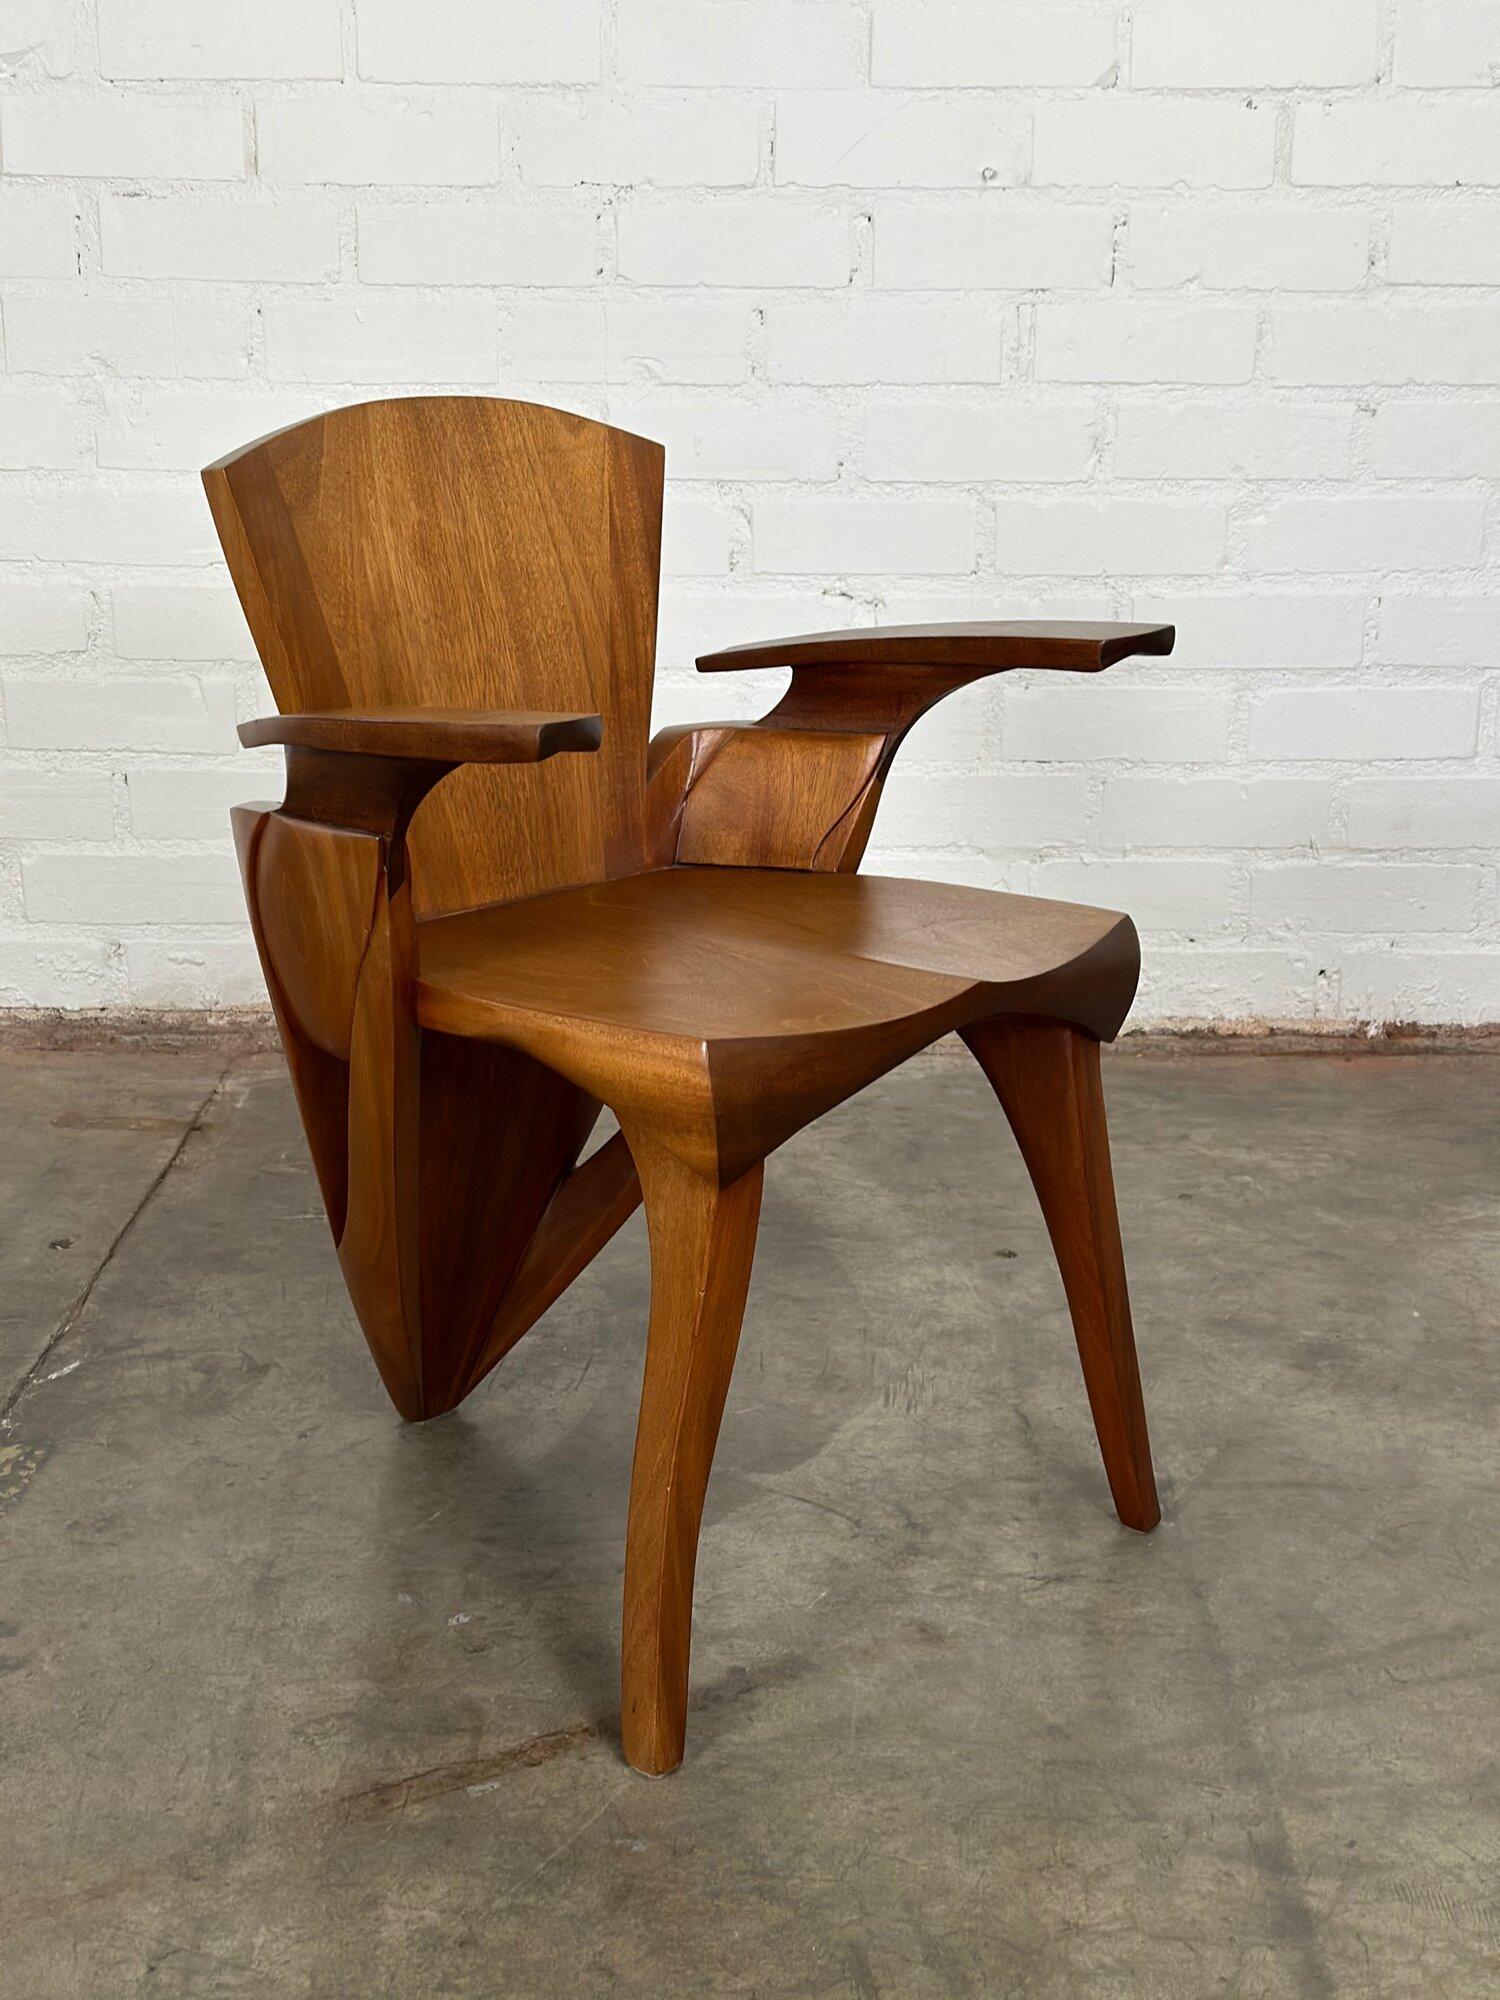 W25 D25 H31 SW18 SD17 SH18 AH25

Exceptionally made pair of sculptural side chairs in solid wood. Chairs have been fully restored and inspected by our in house carpenters. Both chairs are sturdy and structurally sound.